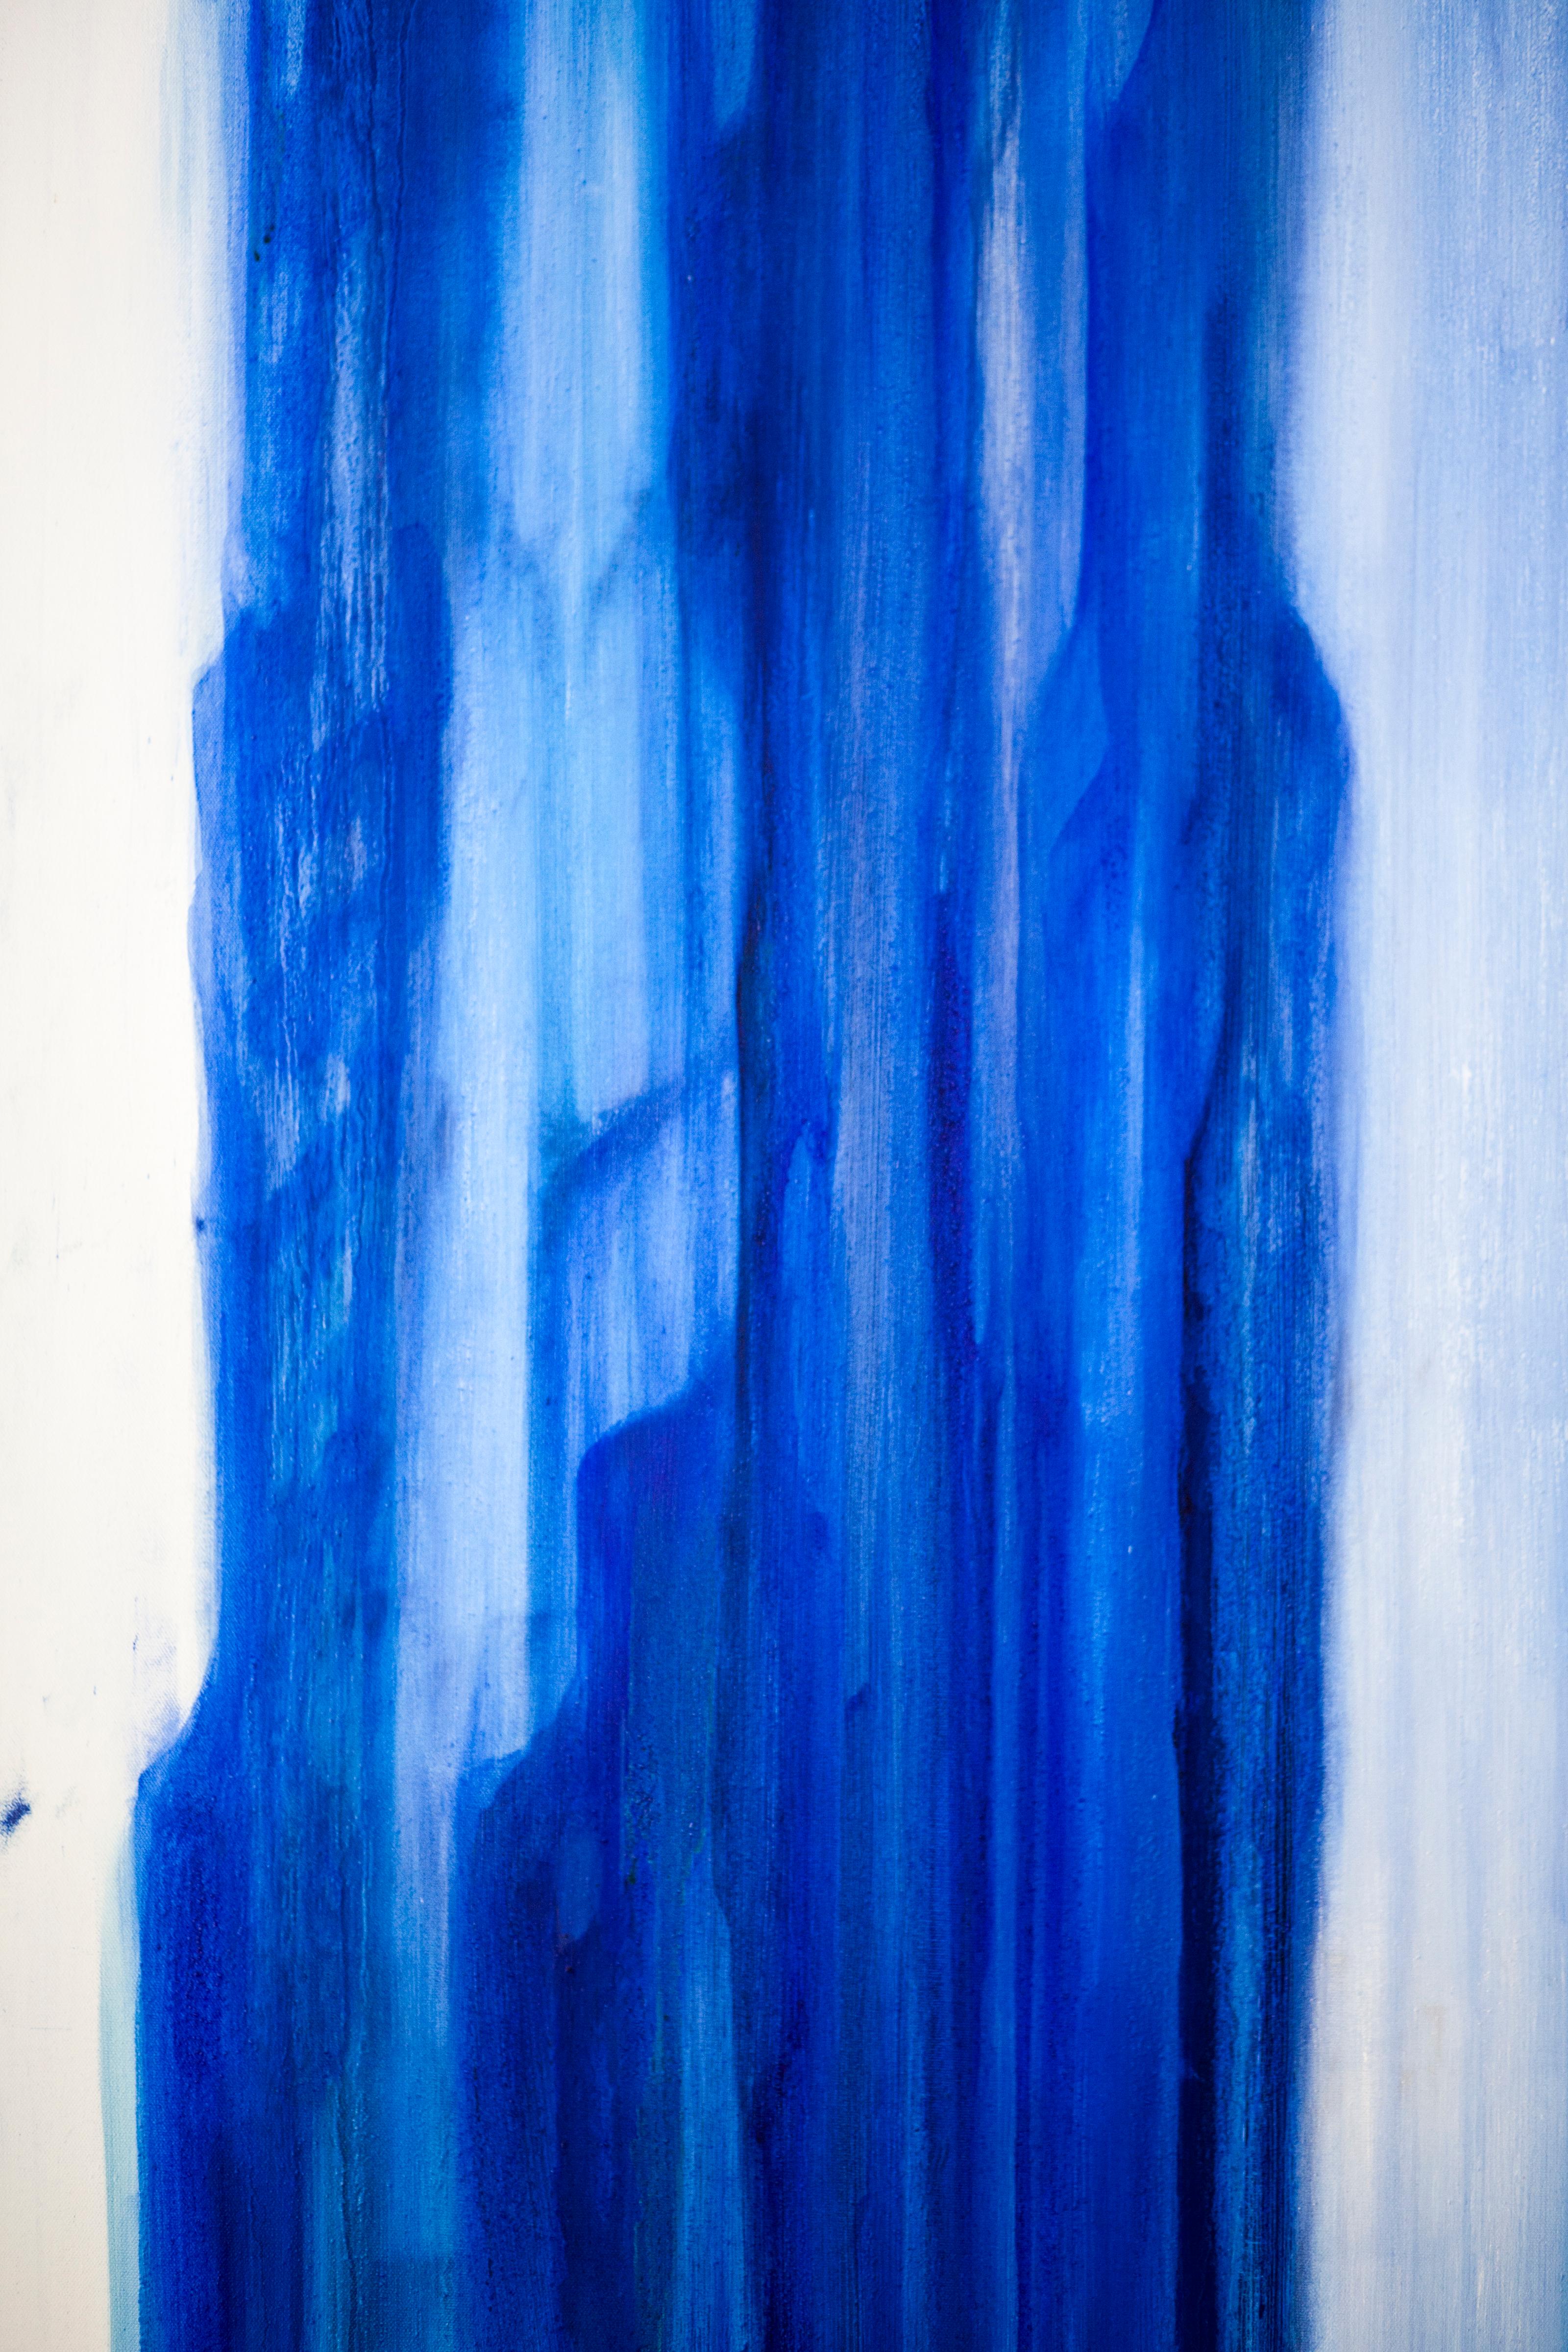 Indigo Lines - Abstract Painting by Christina Craemer